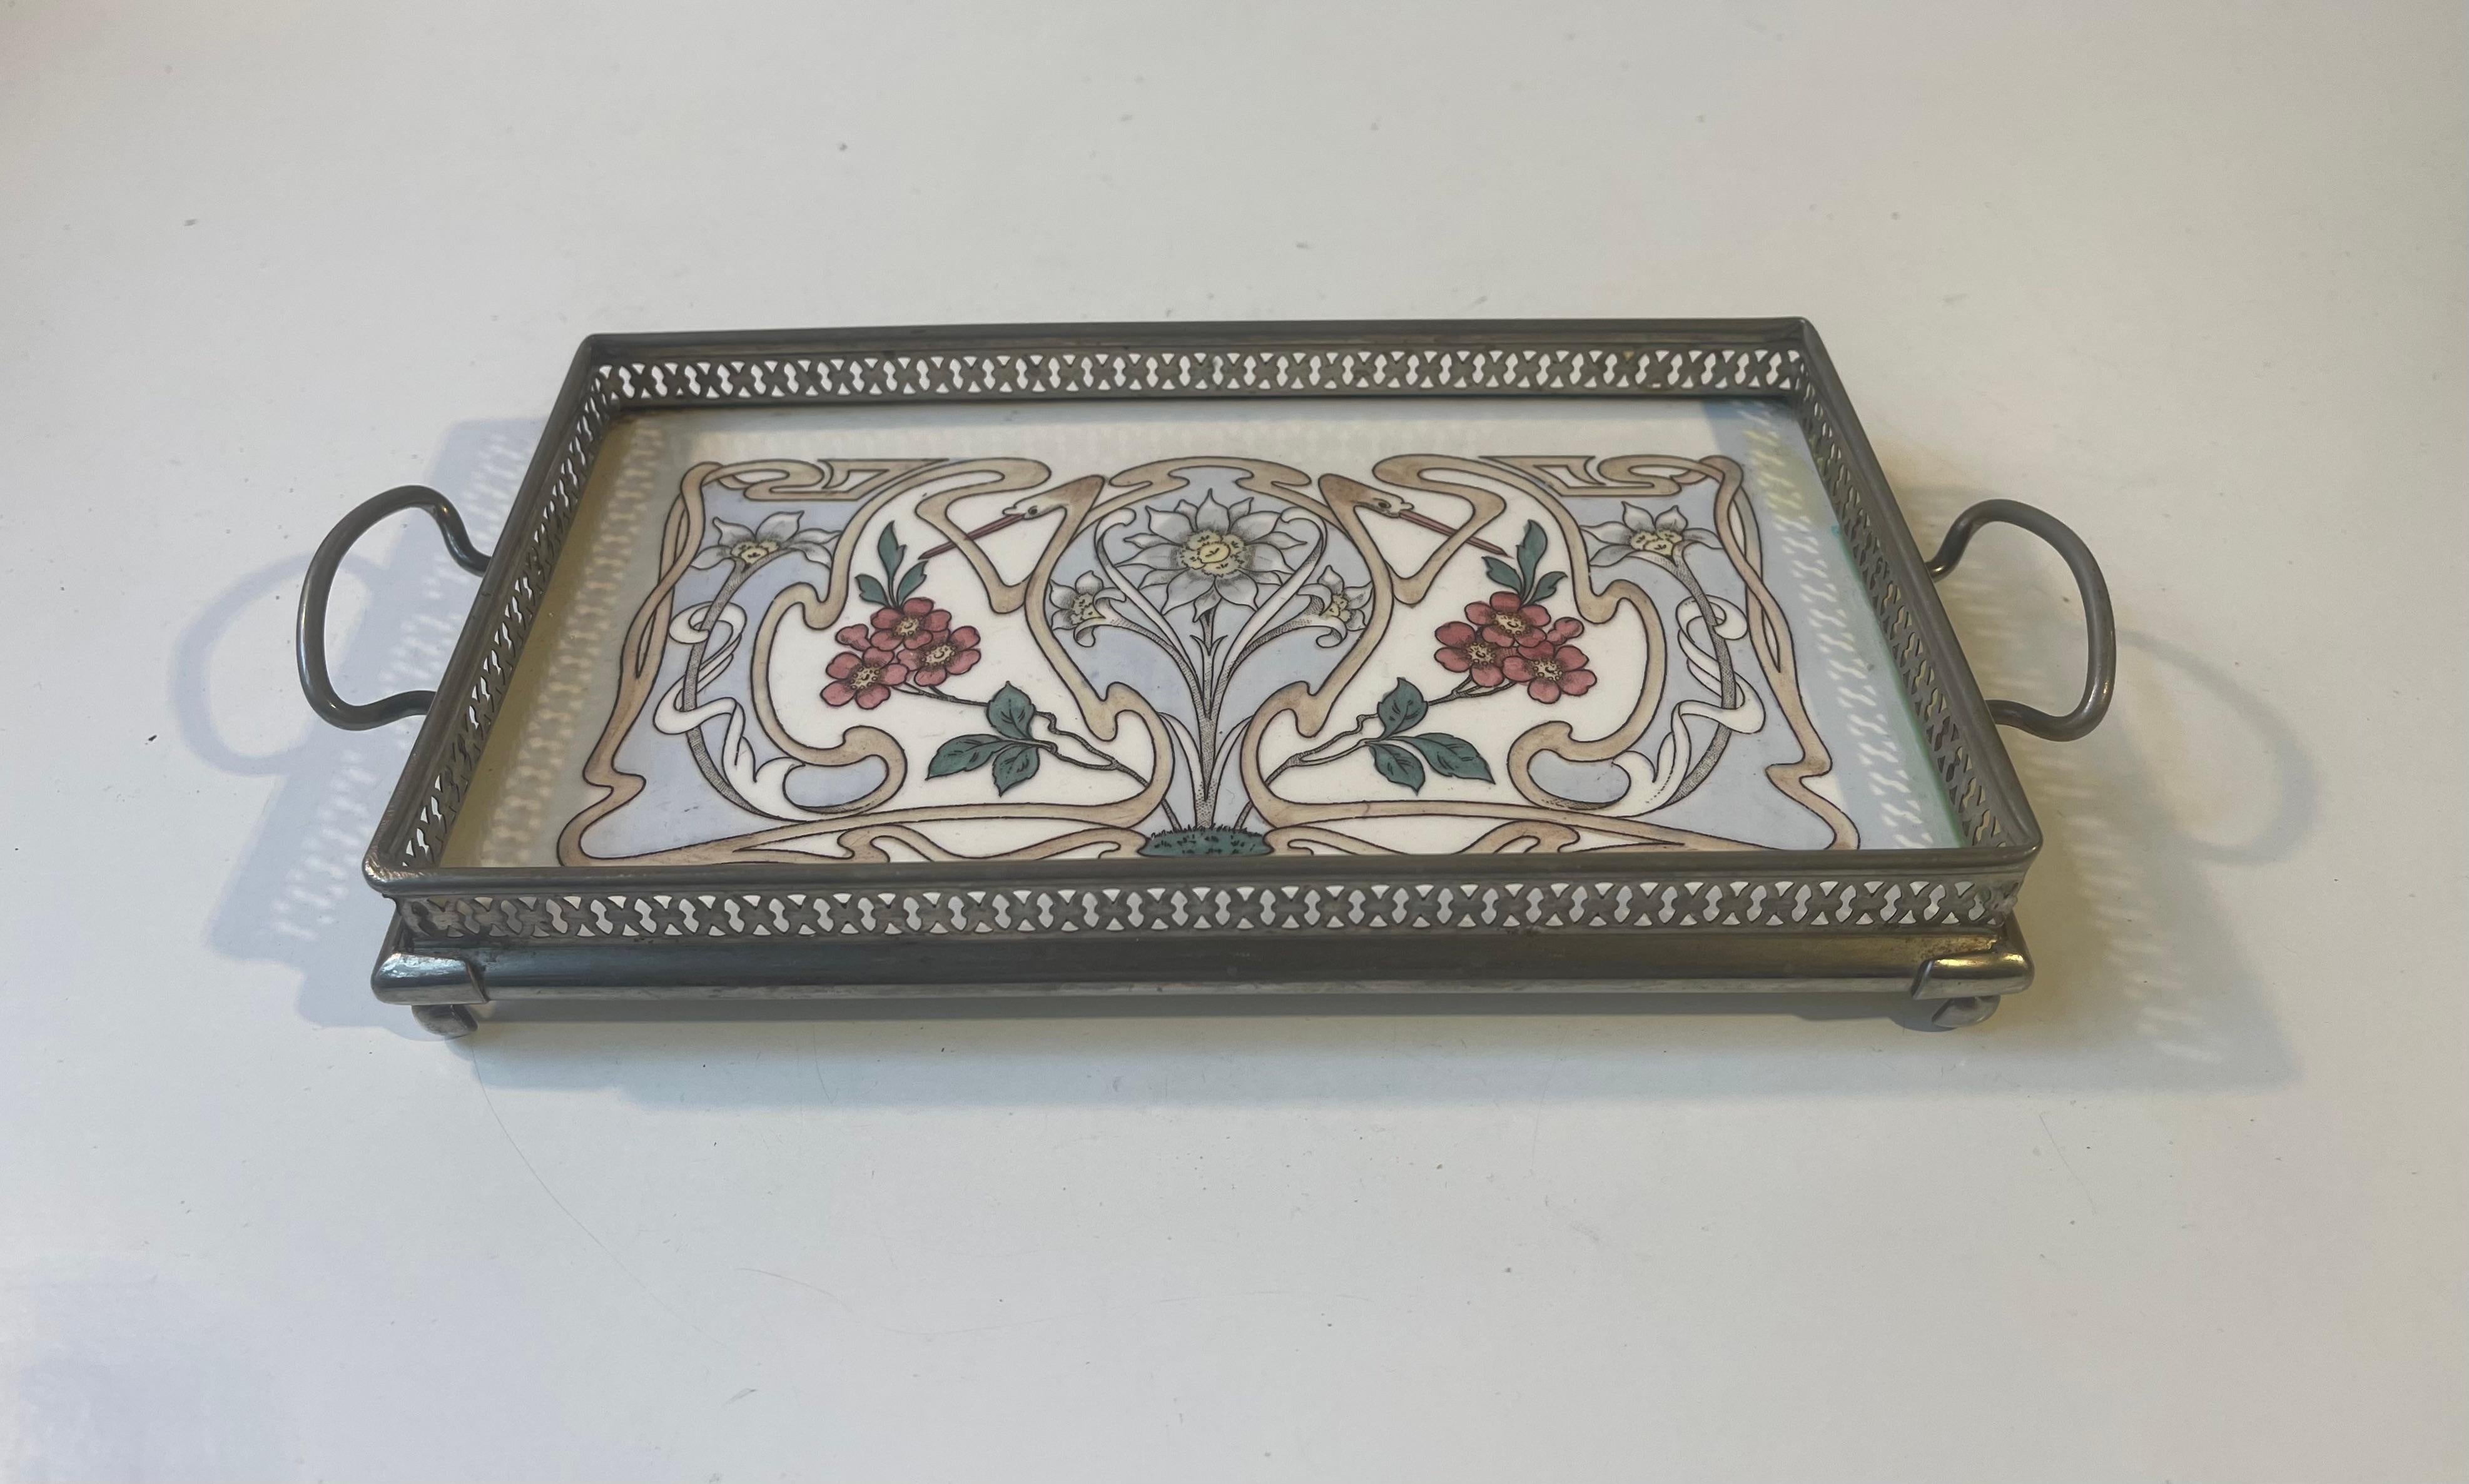 A decorative small sized rectangular tray in perforated nickel-plated metal and hand-painted porcelain. The stars of this motif are two stylized swans that wraps around floral decorations. Stamped decor 1711 and some other numerals to its backside.